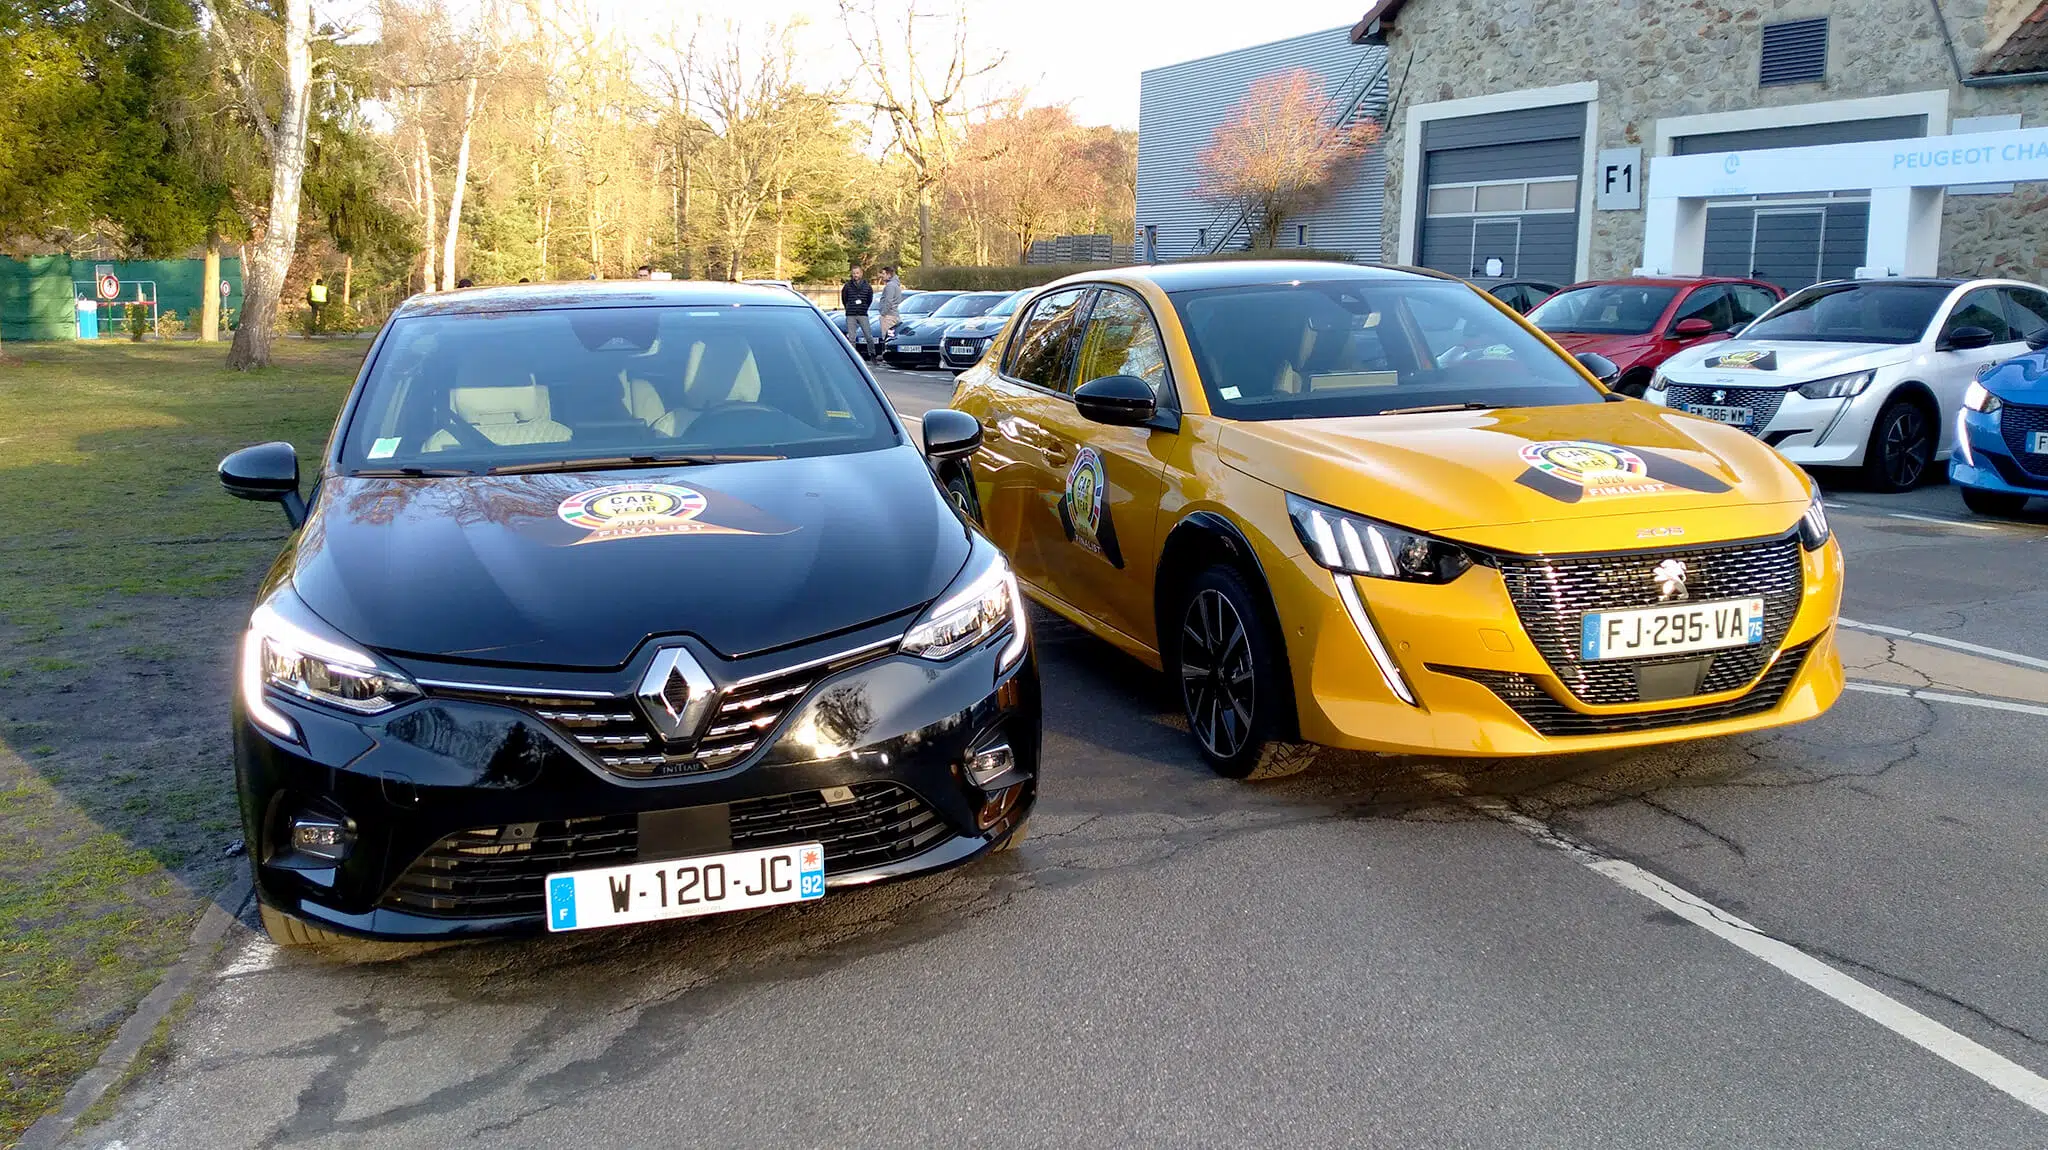 Car of the Year 2020 — Renault Clio vs Peugeot 208